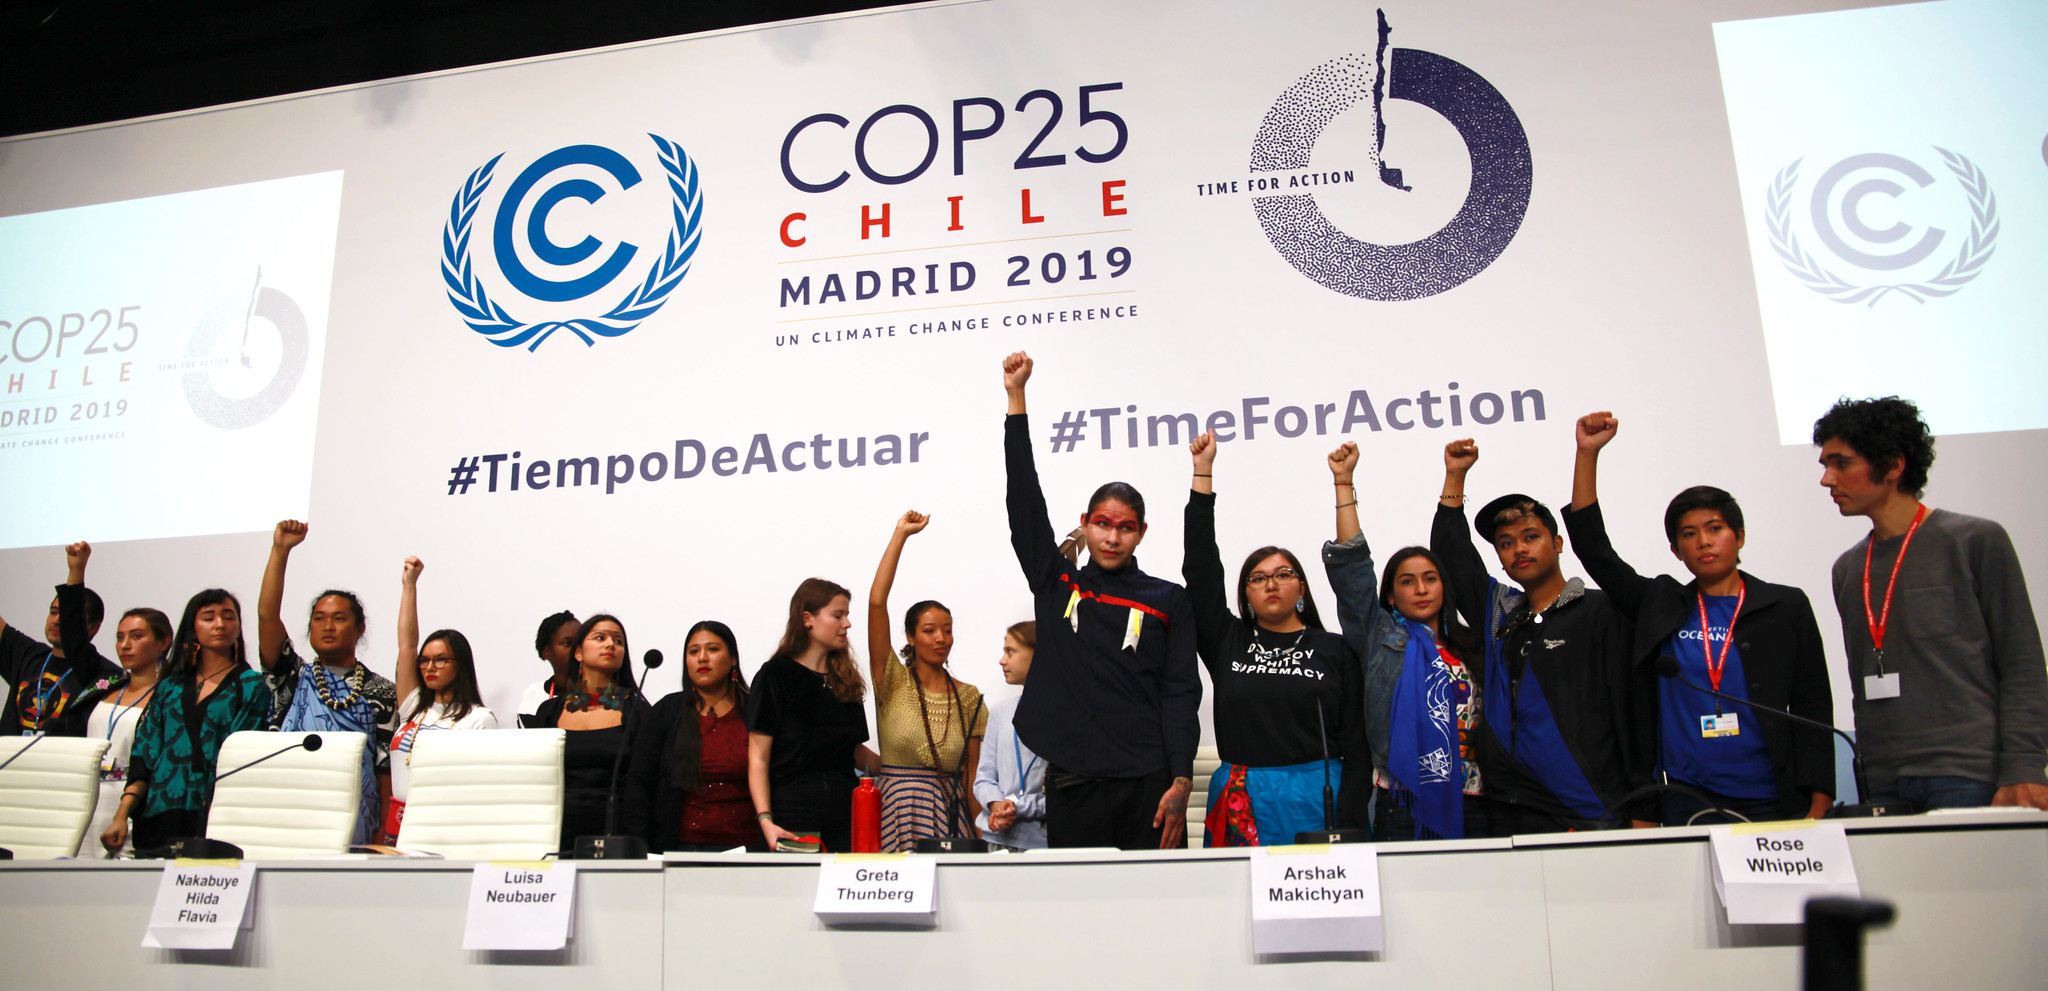 Young climate activists during a press briefing held on December 9, 2019 at the COP25 in Madrid, Spain.